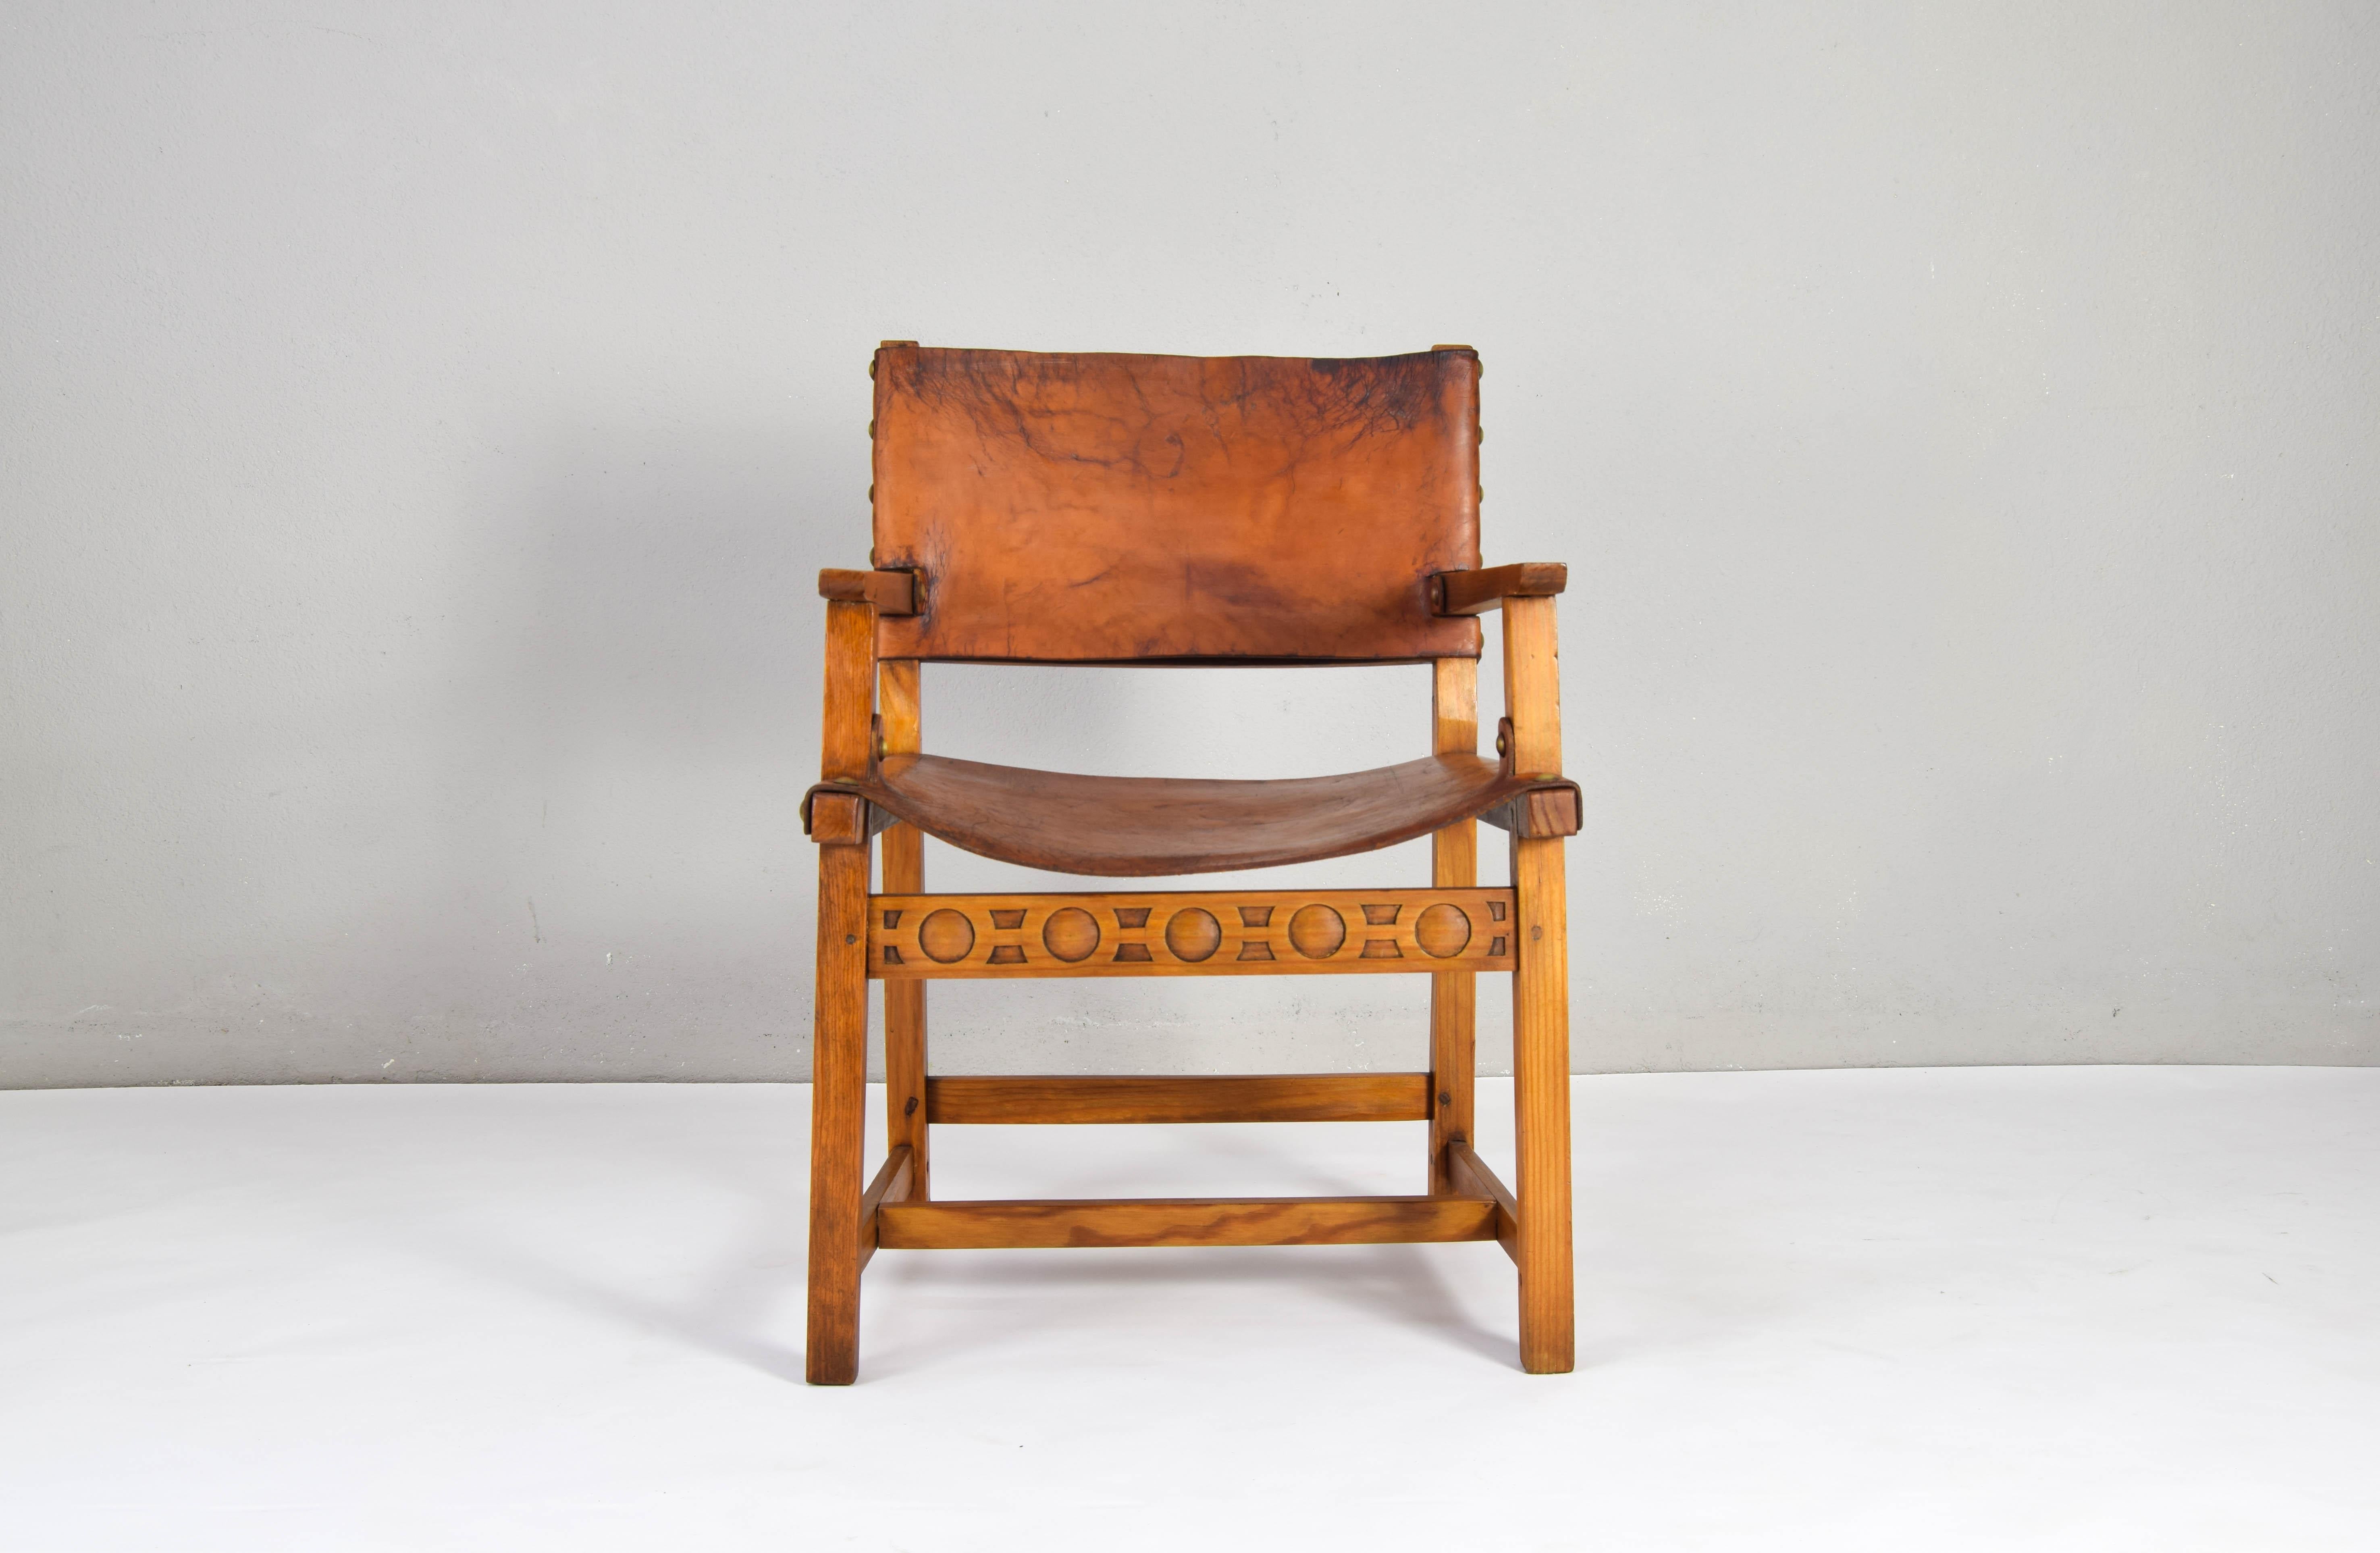 Beautiful leather and oak armchair with brass rivets made in Spain at the beginning of the 19th century.
Authentic Castellana Brutalist chair.
Made, carved and assembled in a completely artisanal way, which makes it a unique antique piece.
The